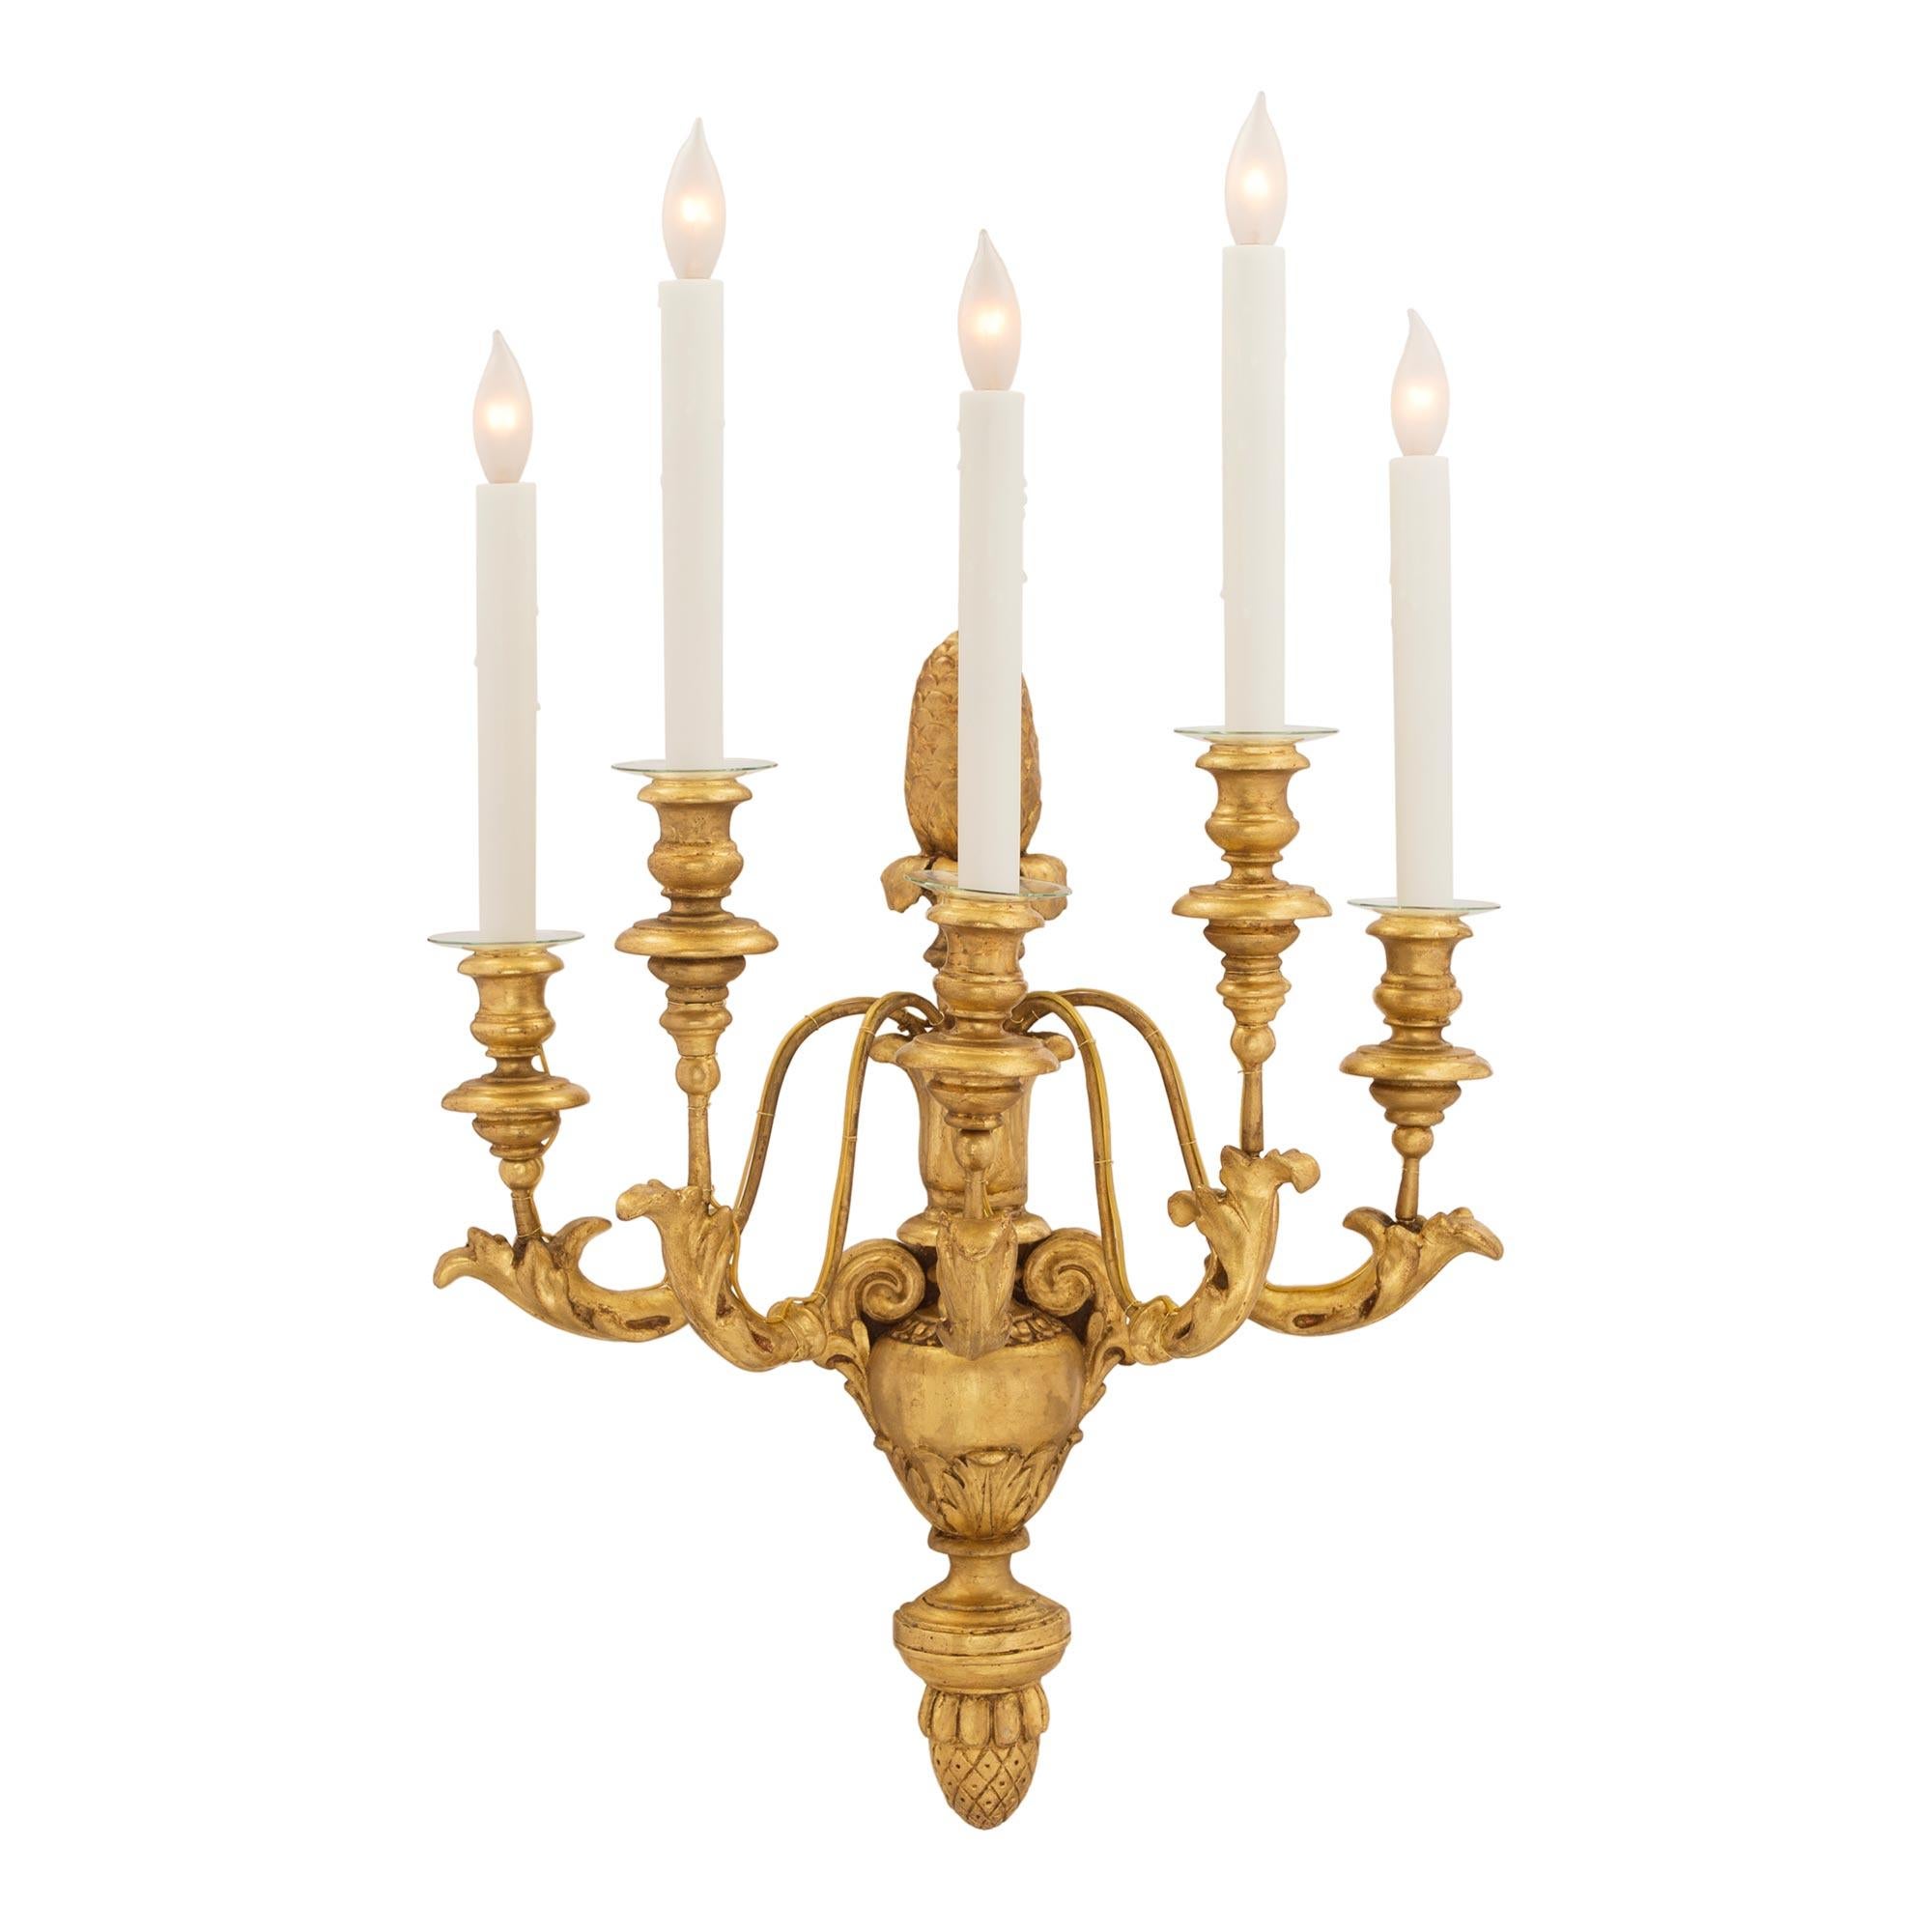 A lovely pair of Italian 19th century five-arm giltwood Tuscan sconces. Each sconce is centered by a finely carved bottom acorn finial with a most decorative urn at the center. The elegant S-scrolled arms are adorned with large finely carved